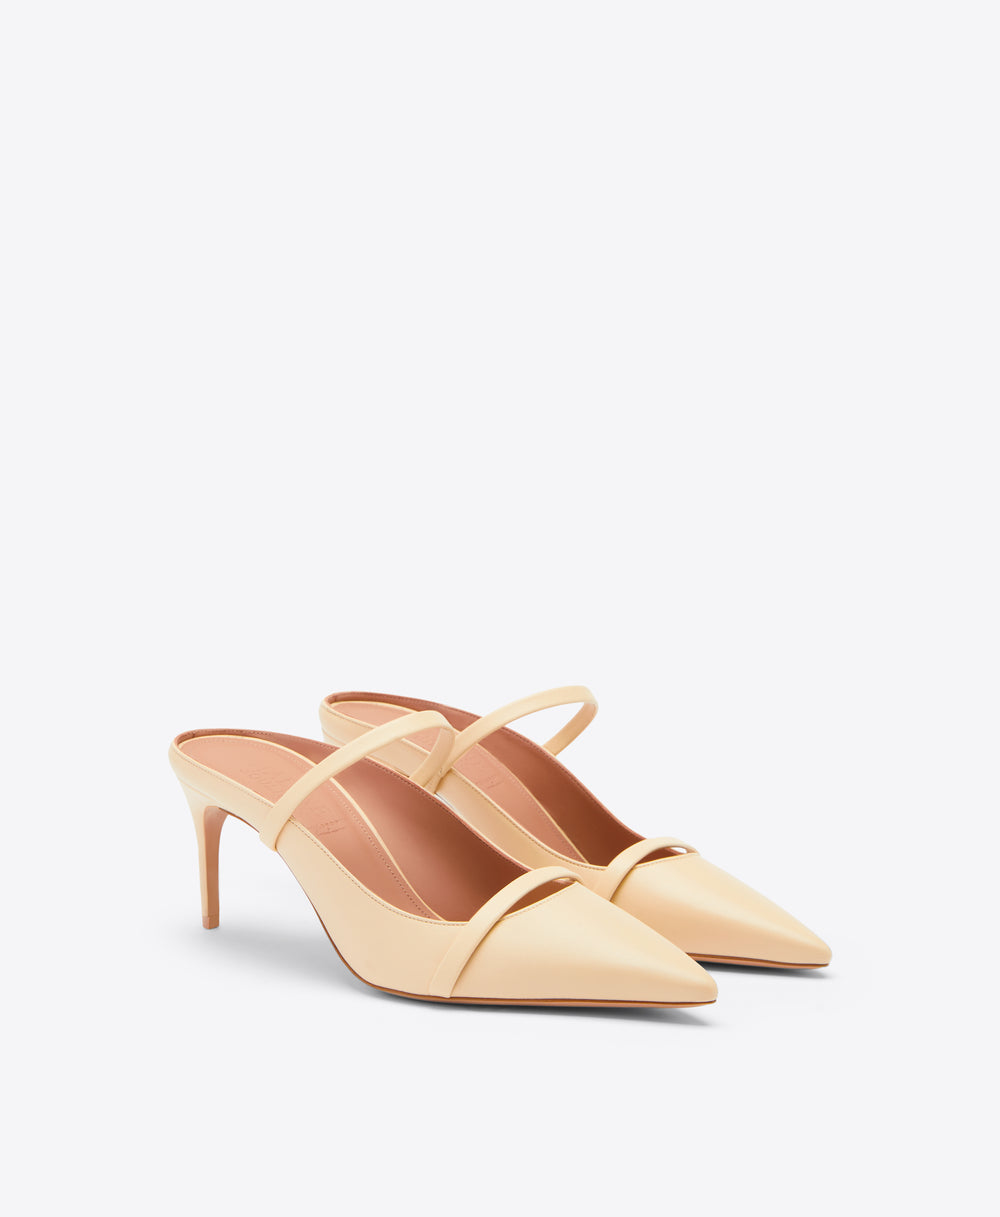 Aurora 70 Butter Leather Heeled Mule Malone Souliers